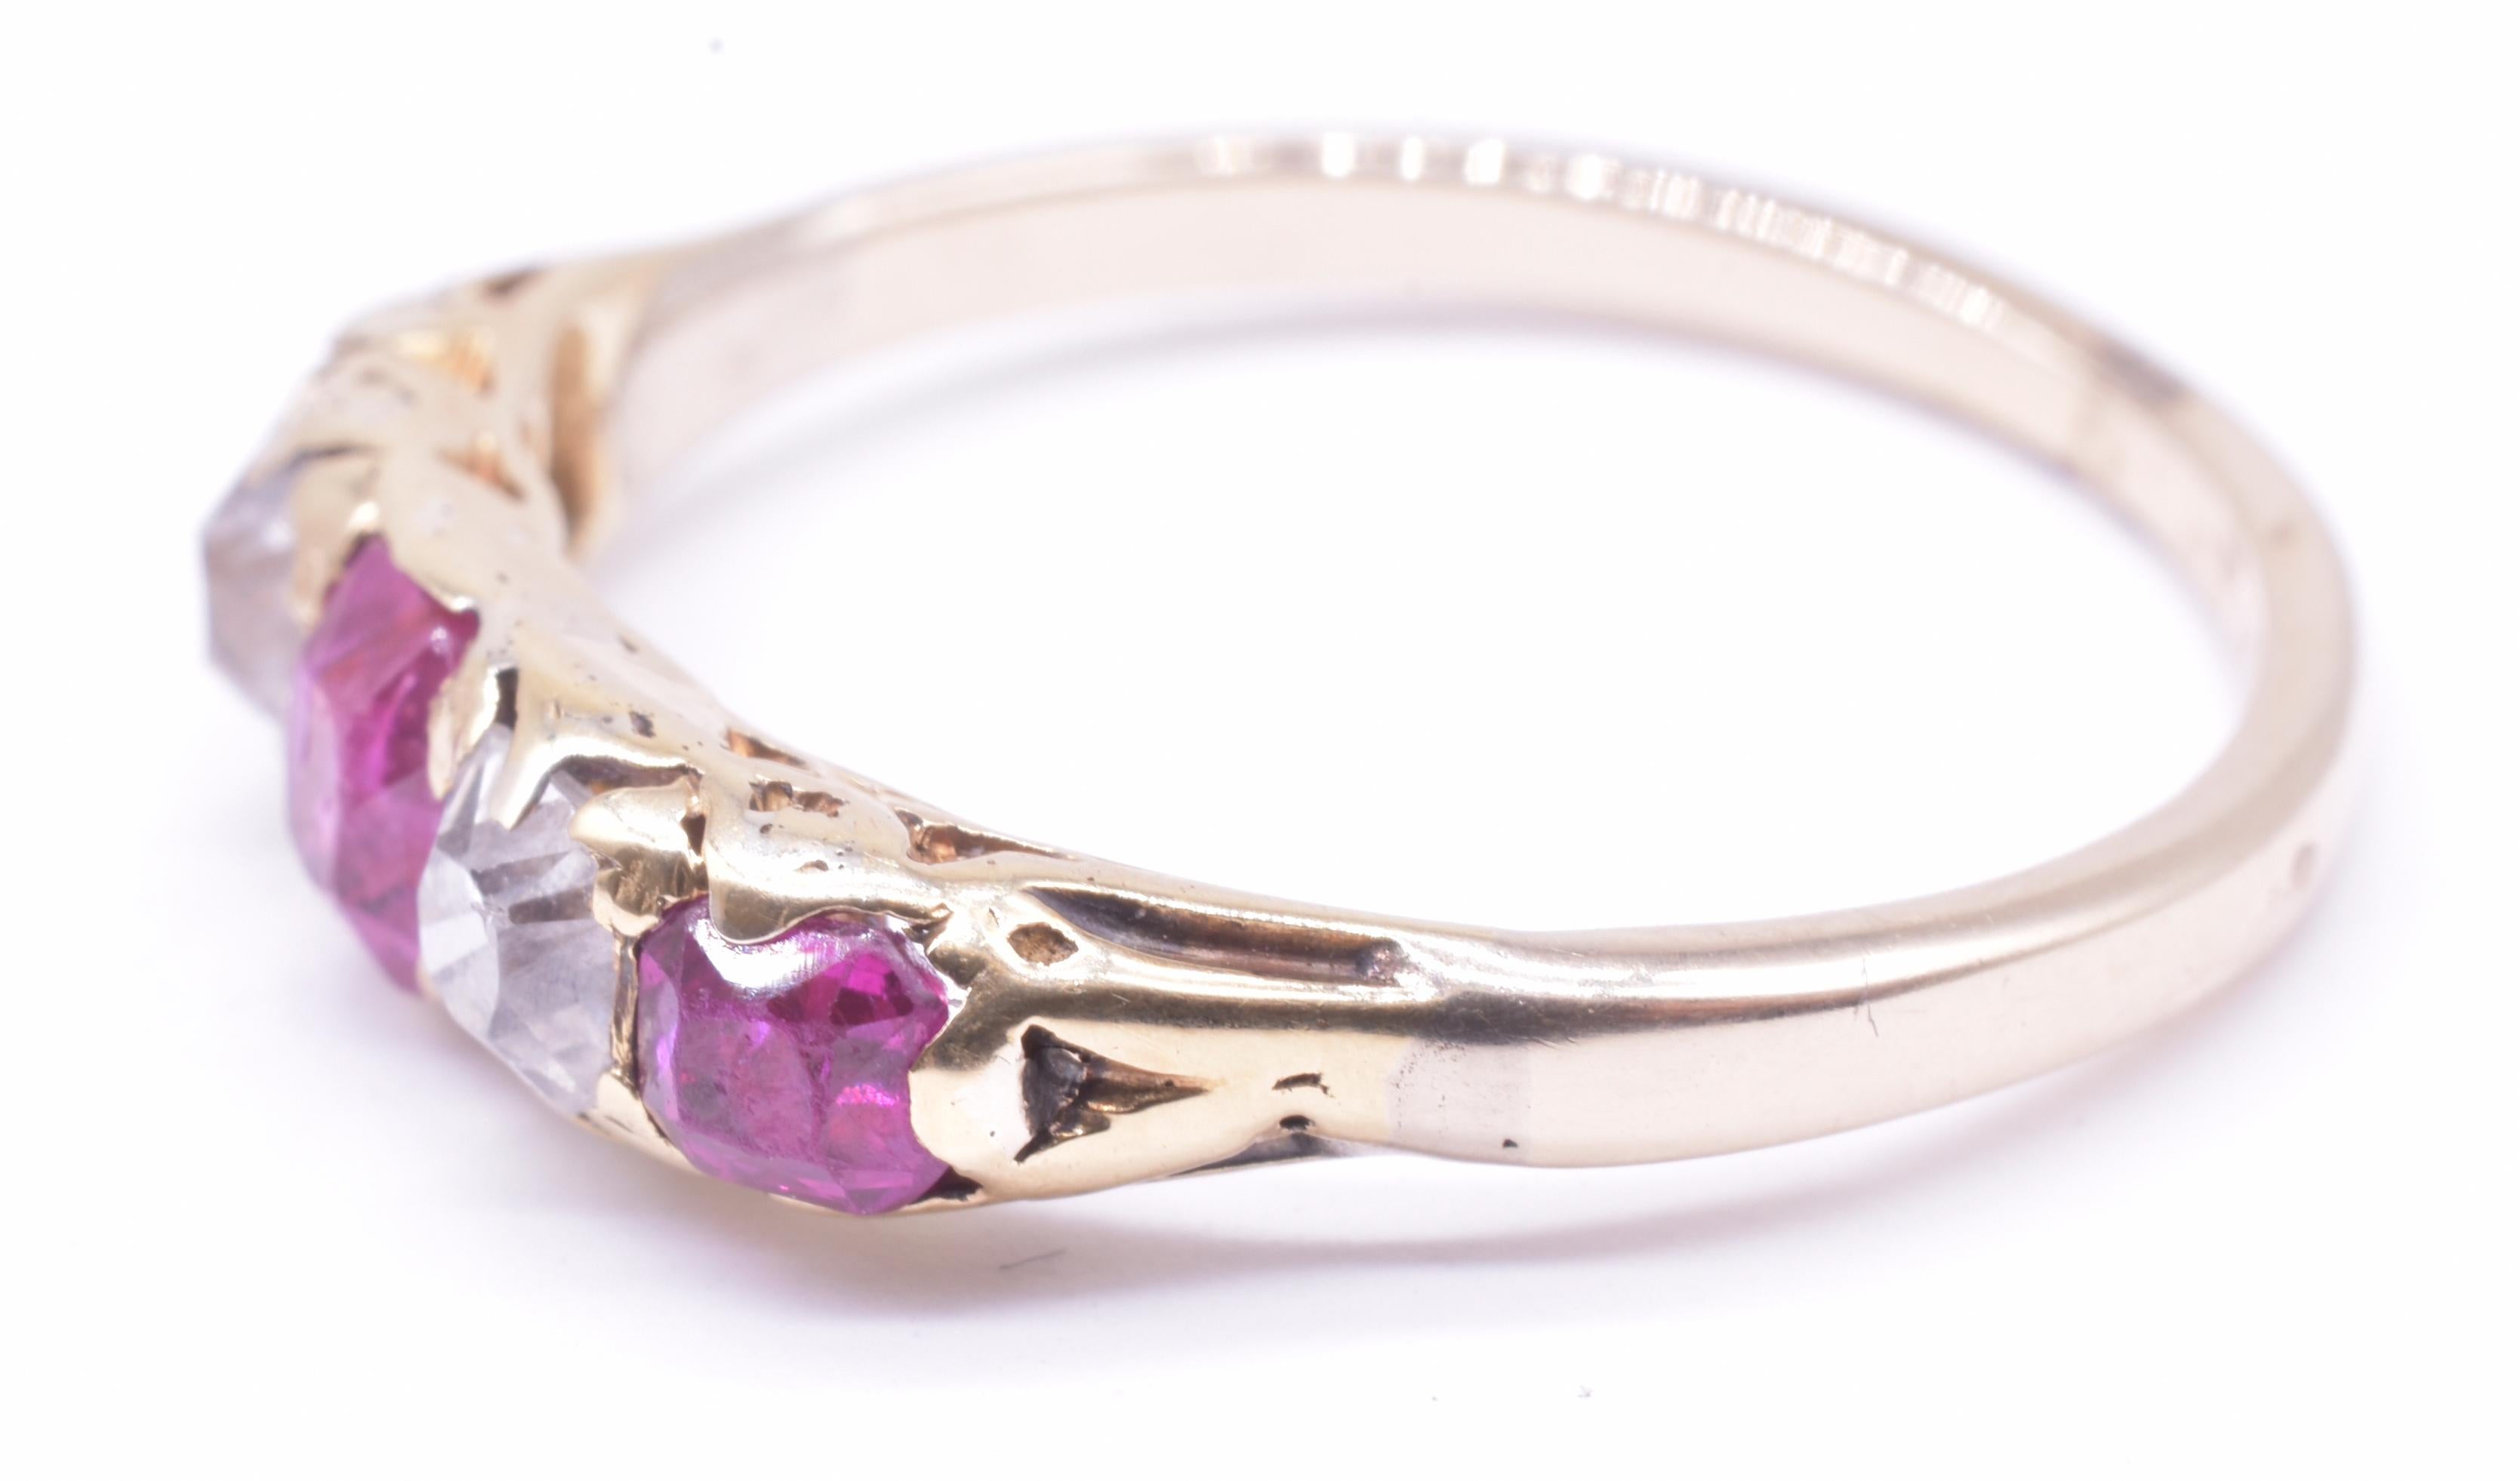 Edwardian 18K yellow gold ruby ring with three clear rubies and two diamonds, in the form of the five stone half hoop ring, with the emphasis on the gemstones. The ring is set 